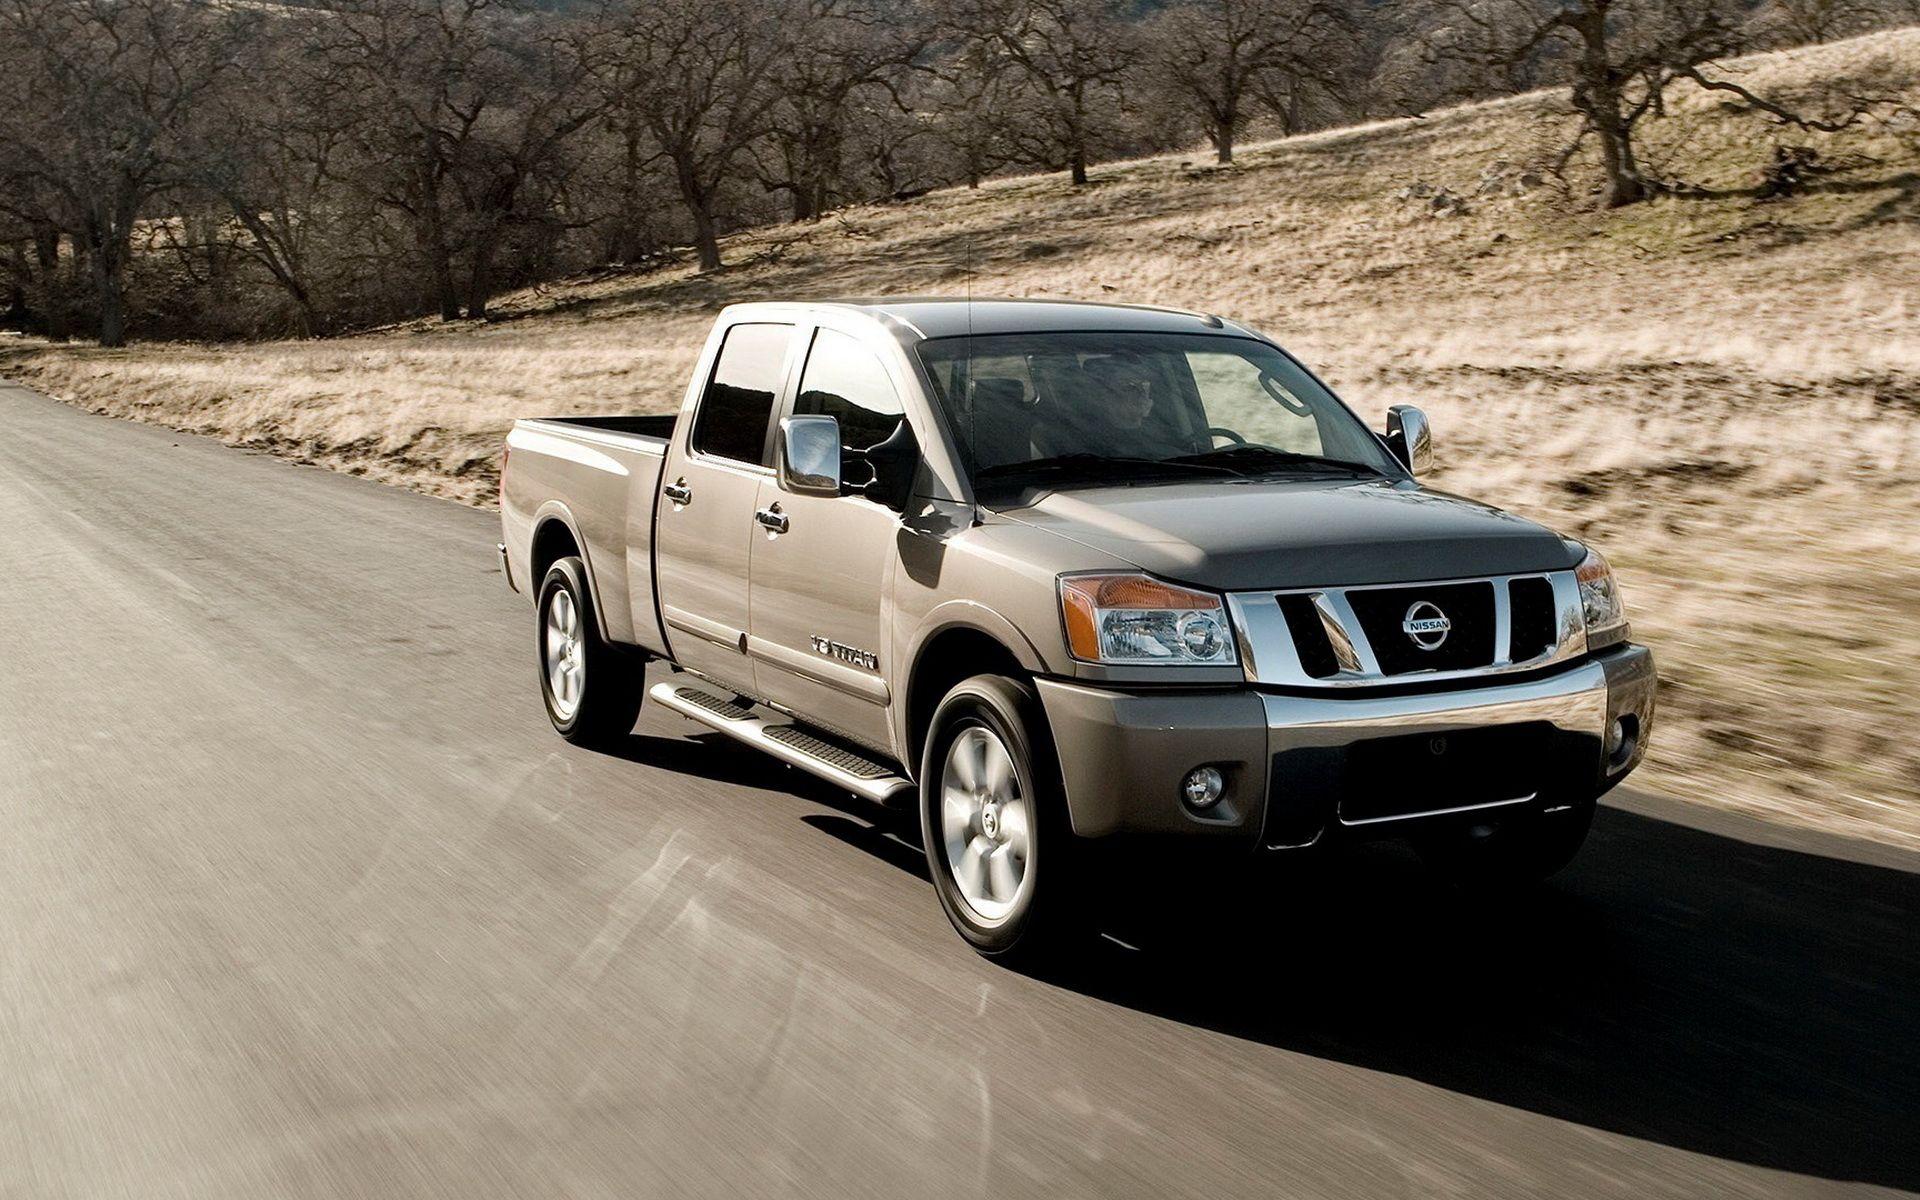 Nissan Titan wallpaper and image, picture, photo